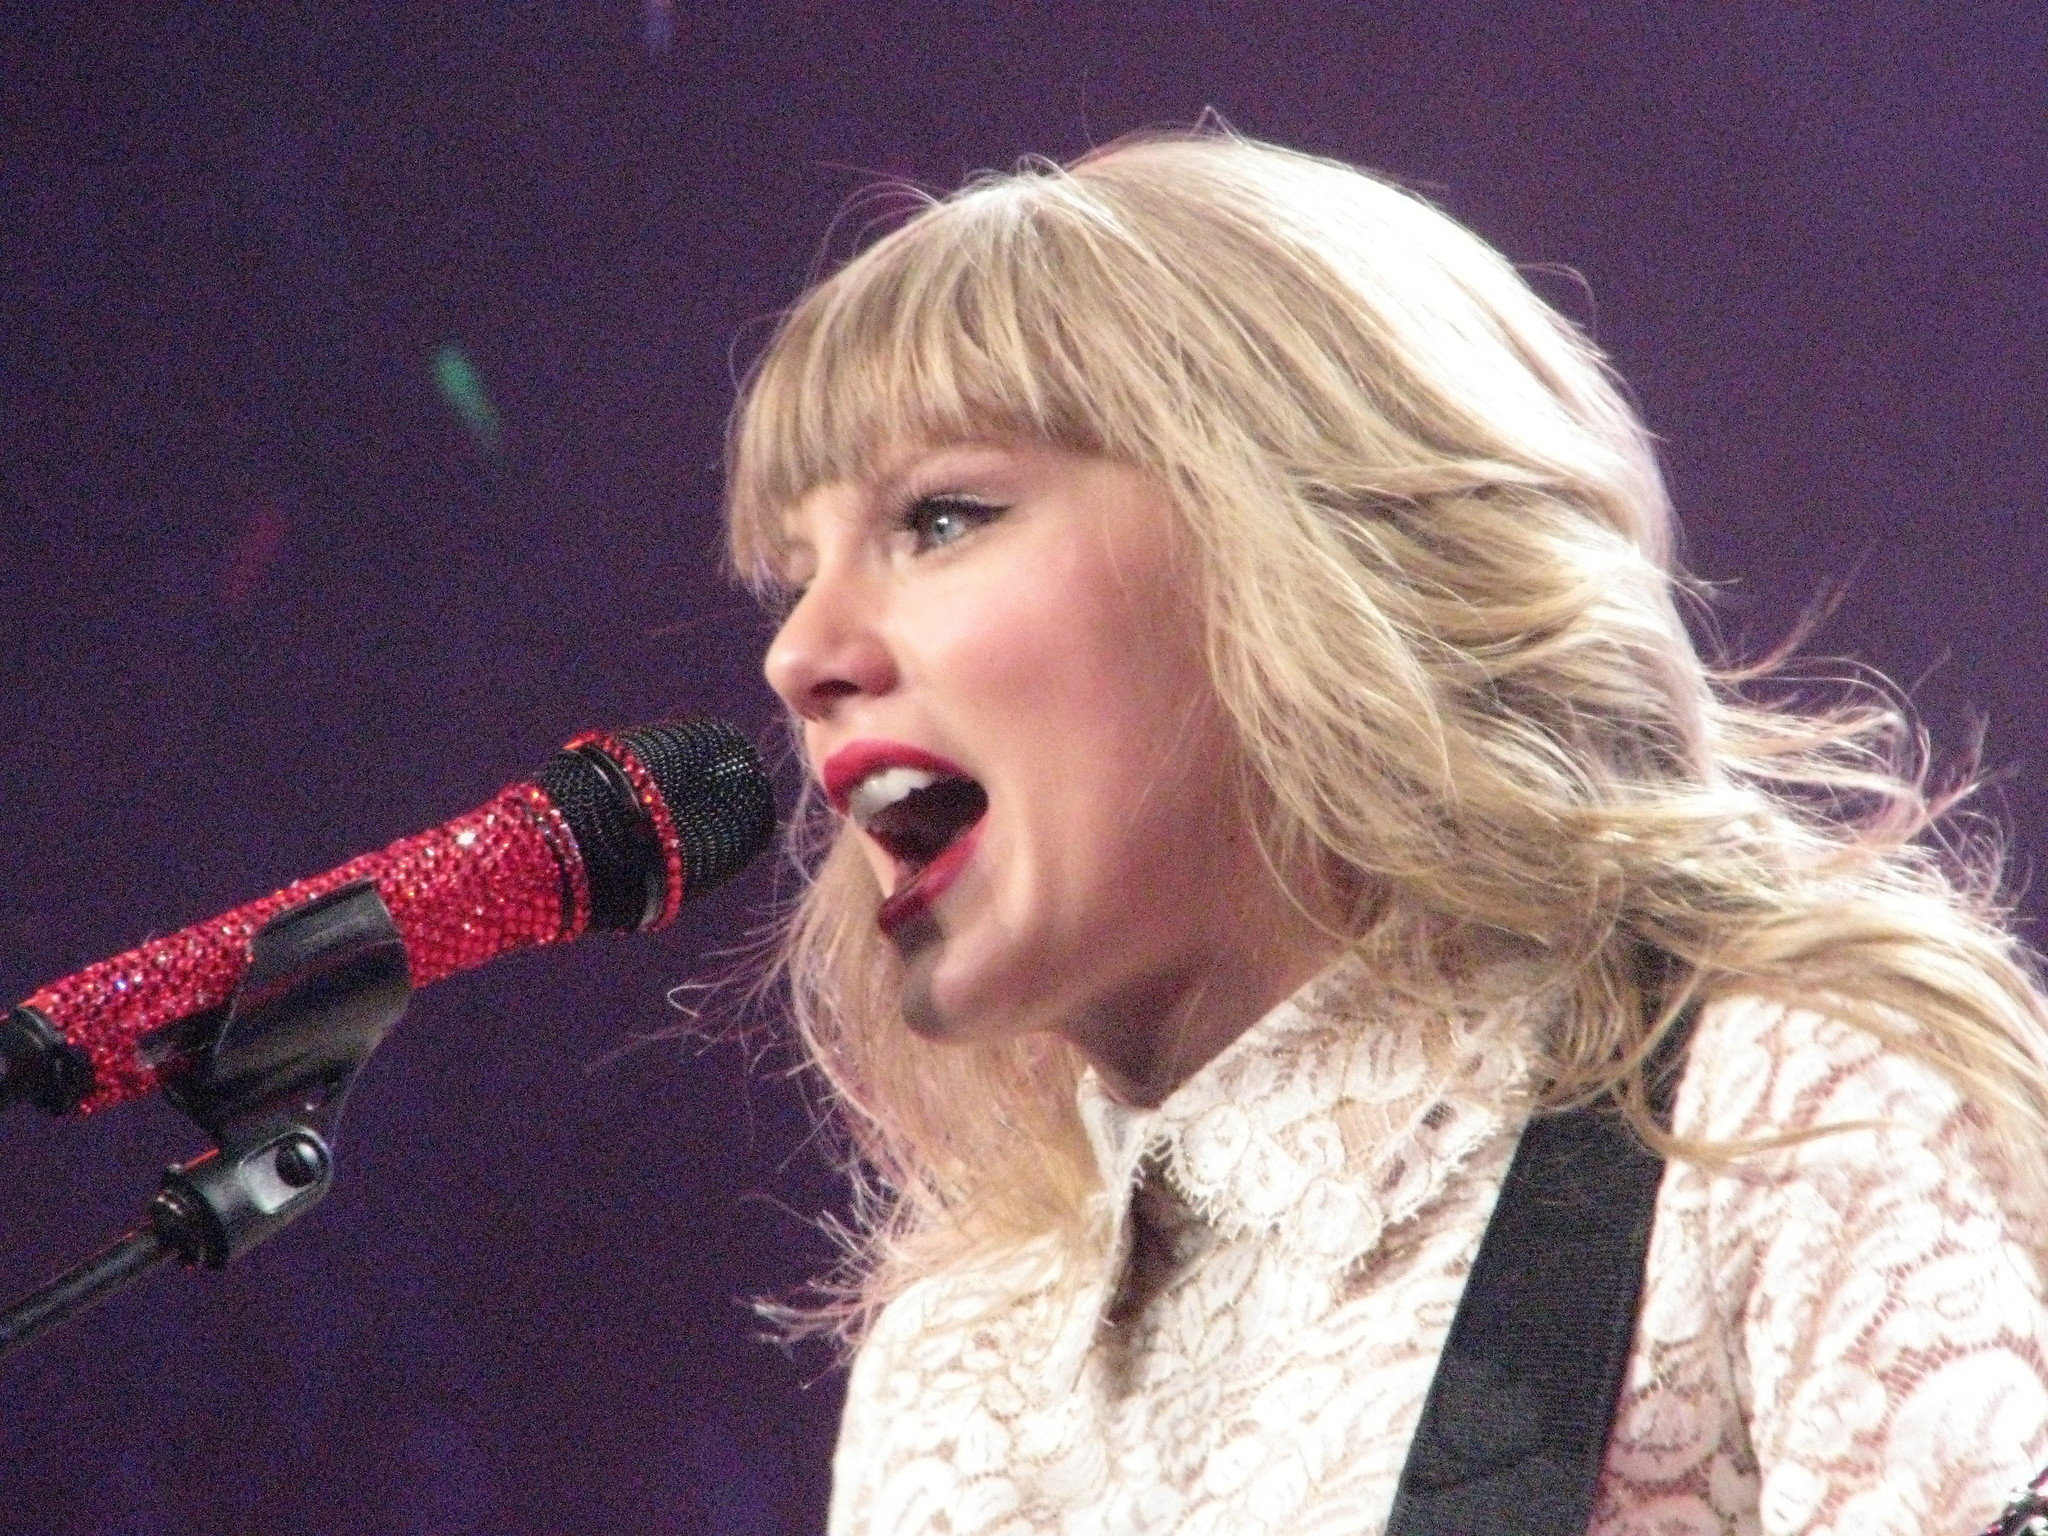 Taylor Swift in Red World Tour